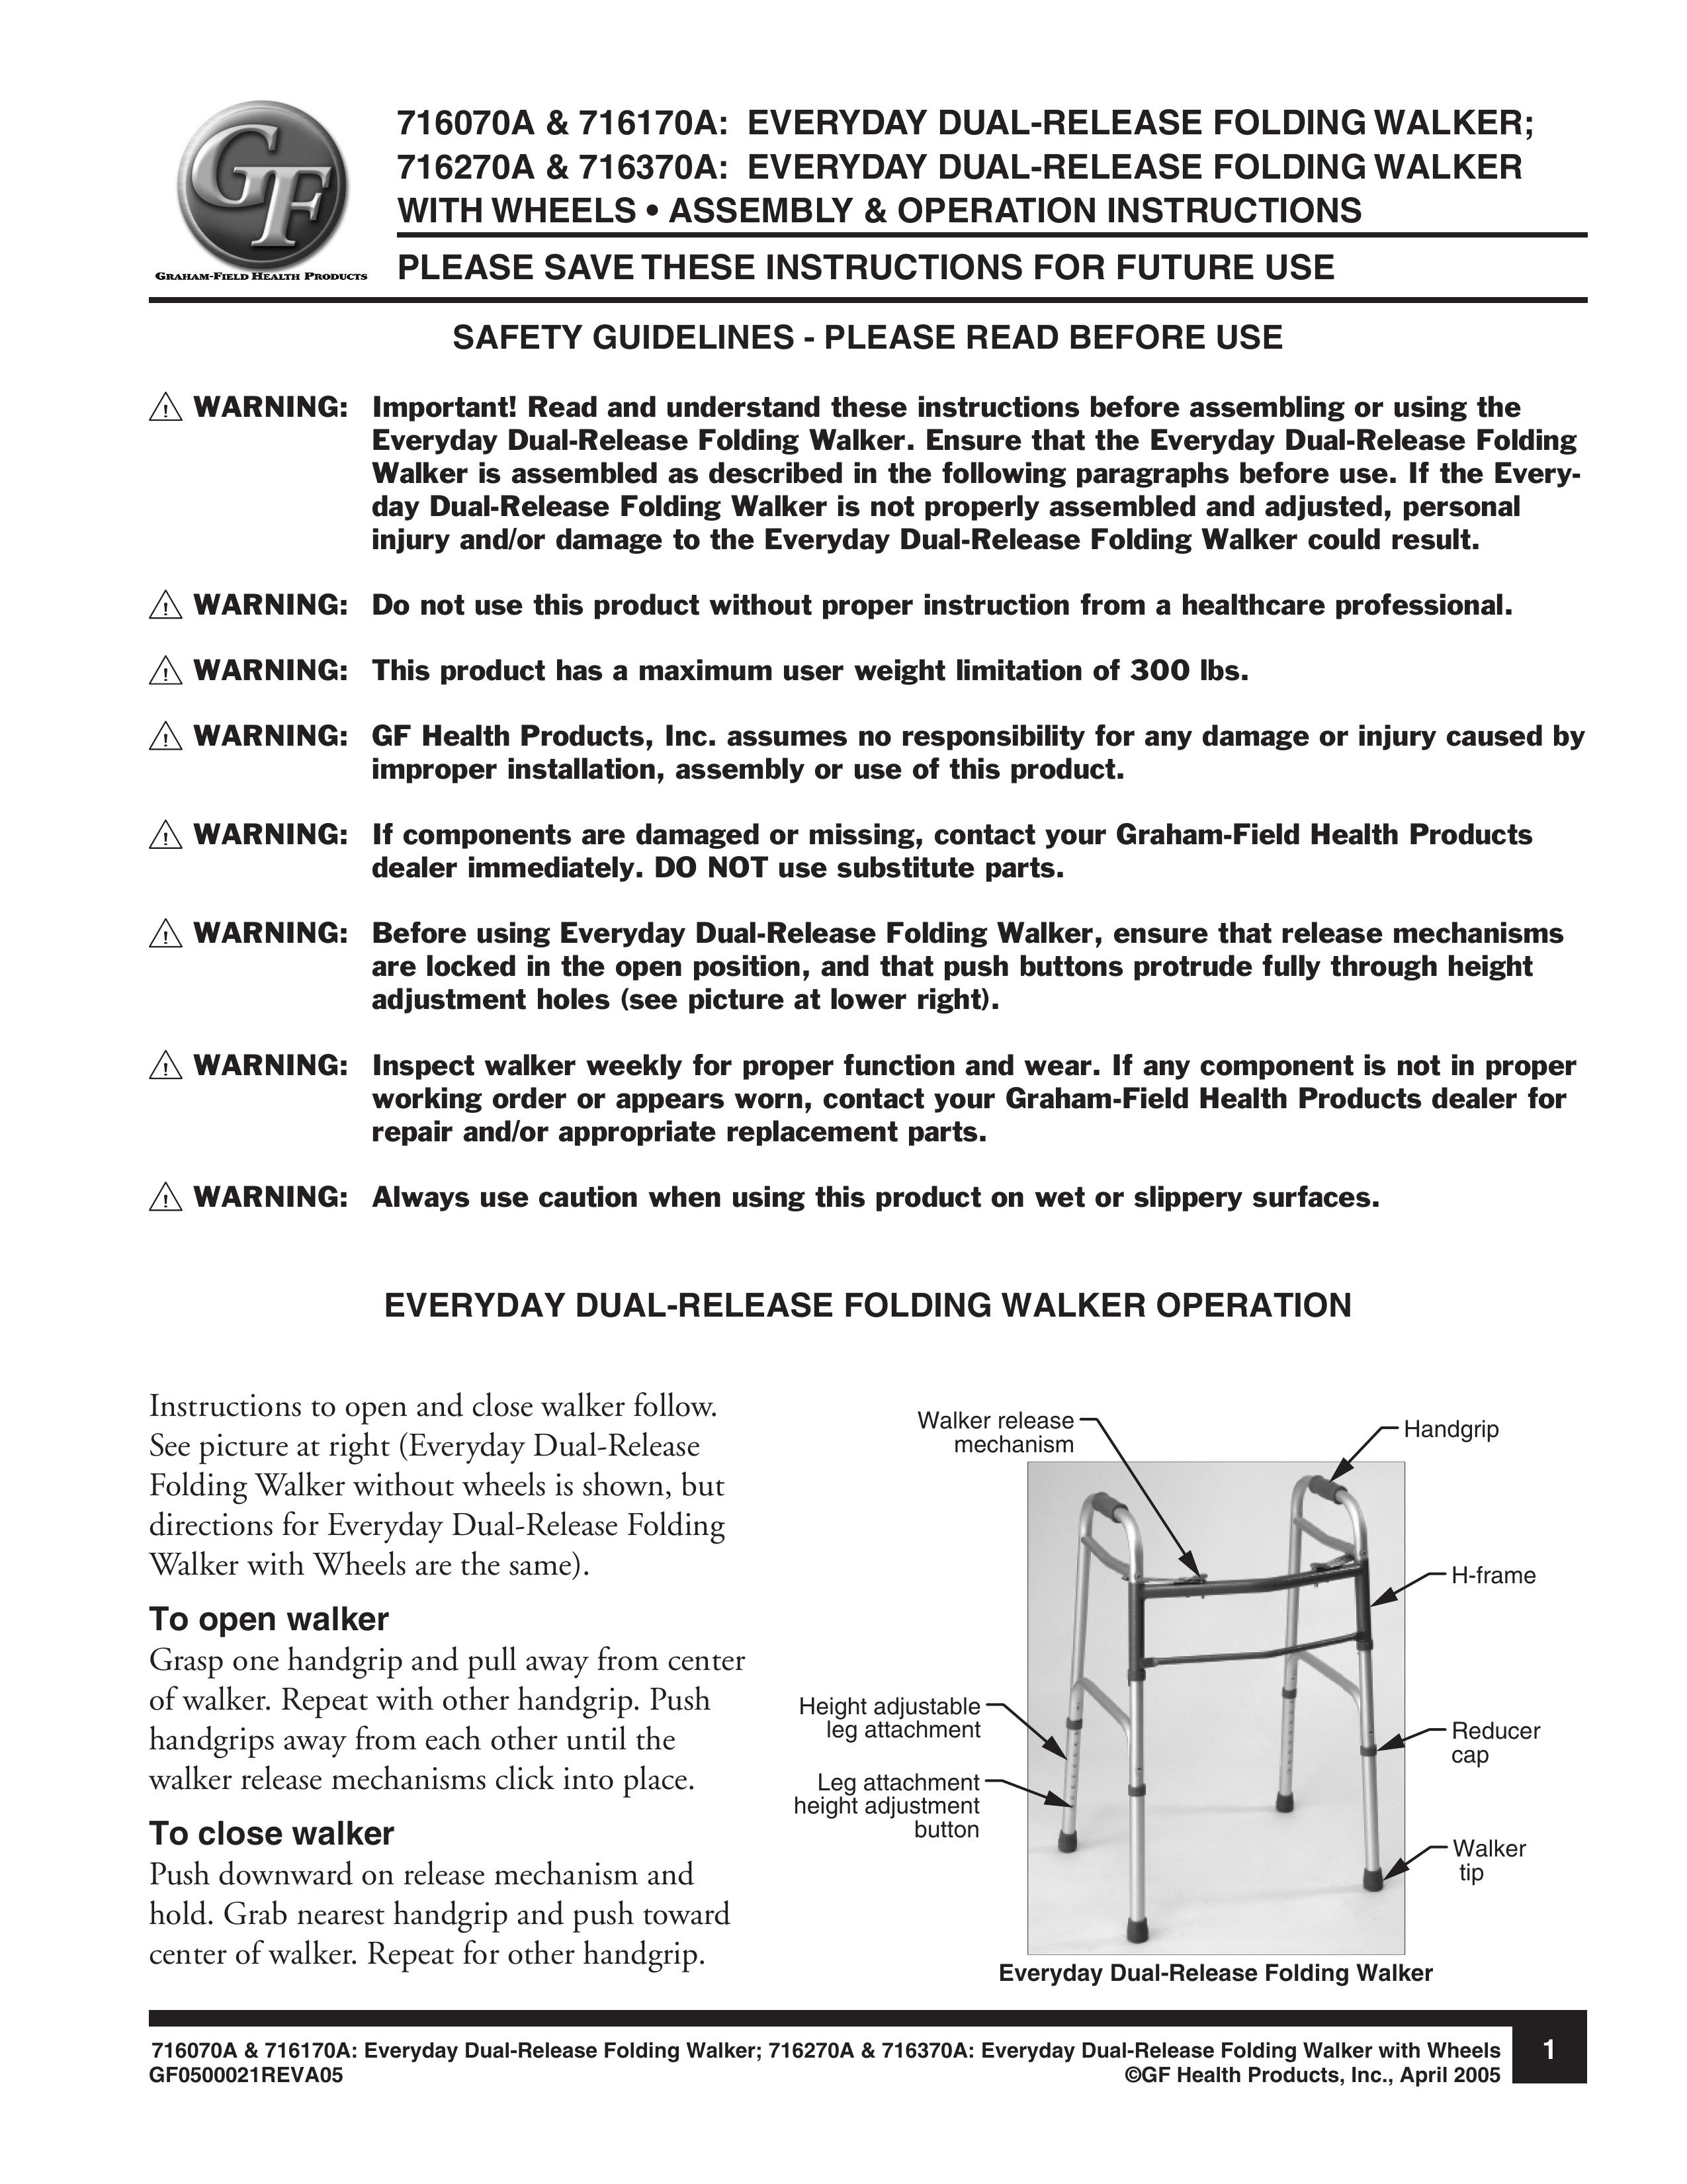 Graham Field 716370A Mobility Aid User Manual